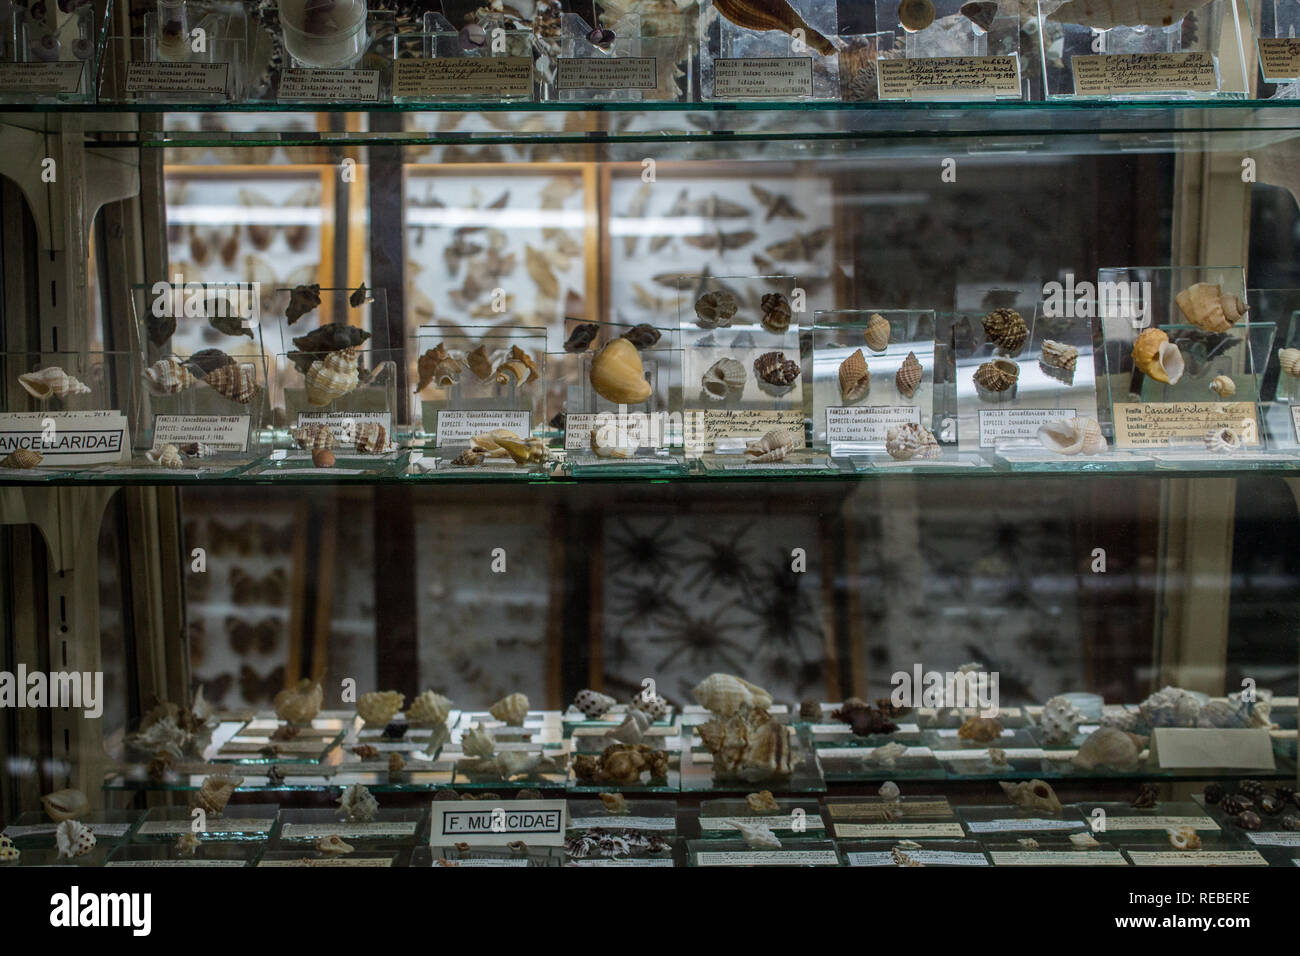 A photo of scientific exhibition of invertebrates (seashells and insects) at the La Salle Natural History Museum in San Jose, Costa Rica Stock Photo